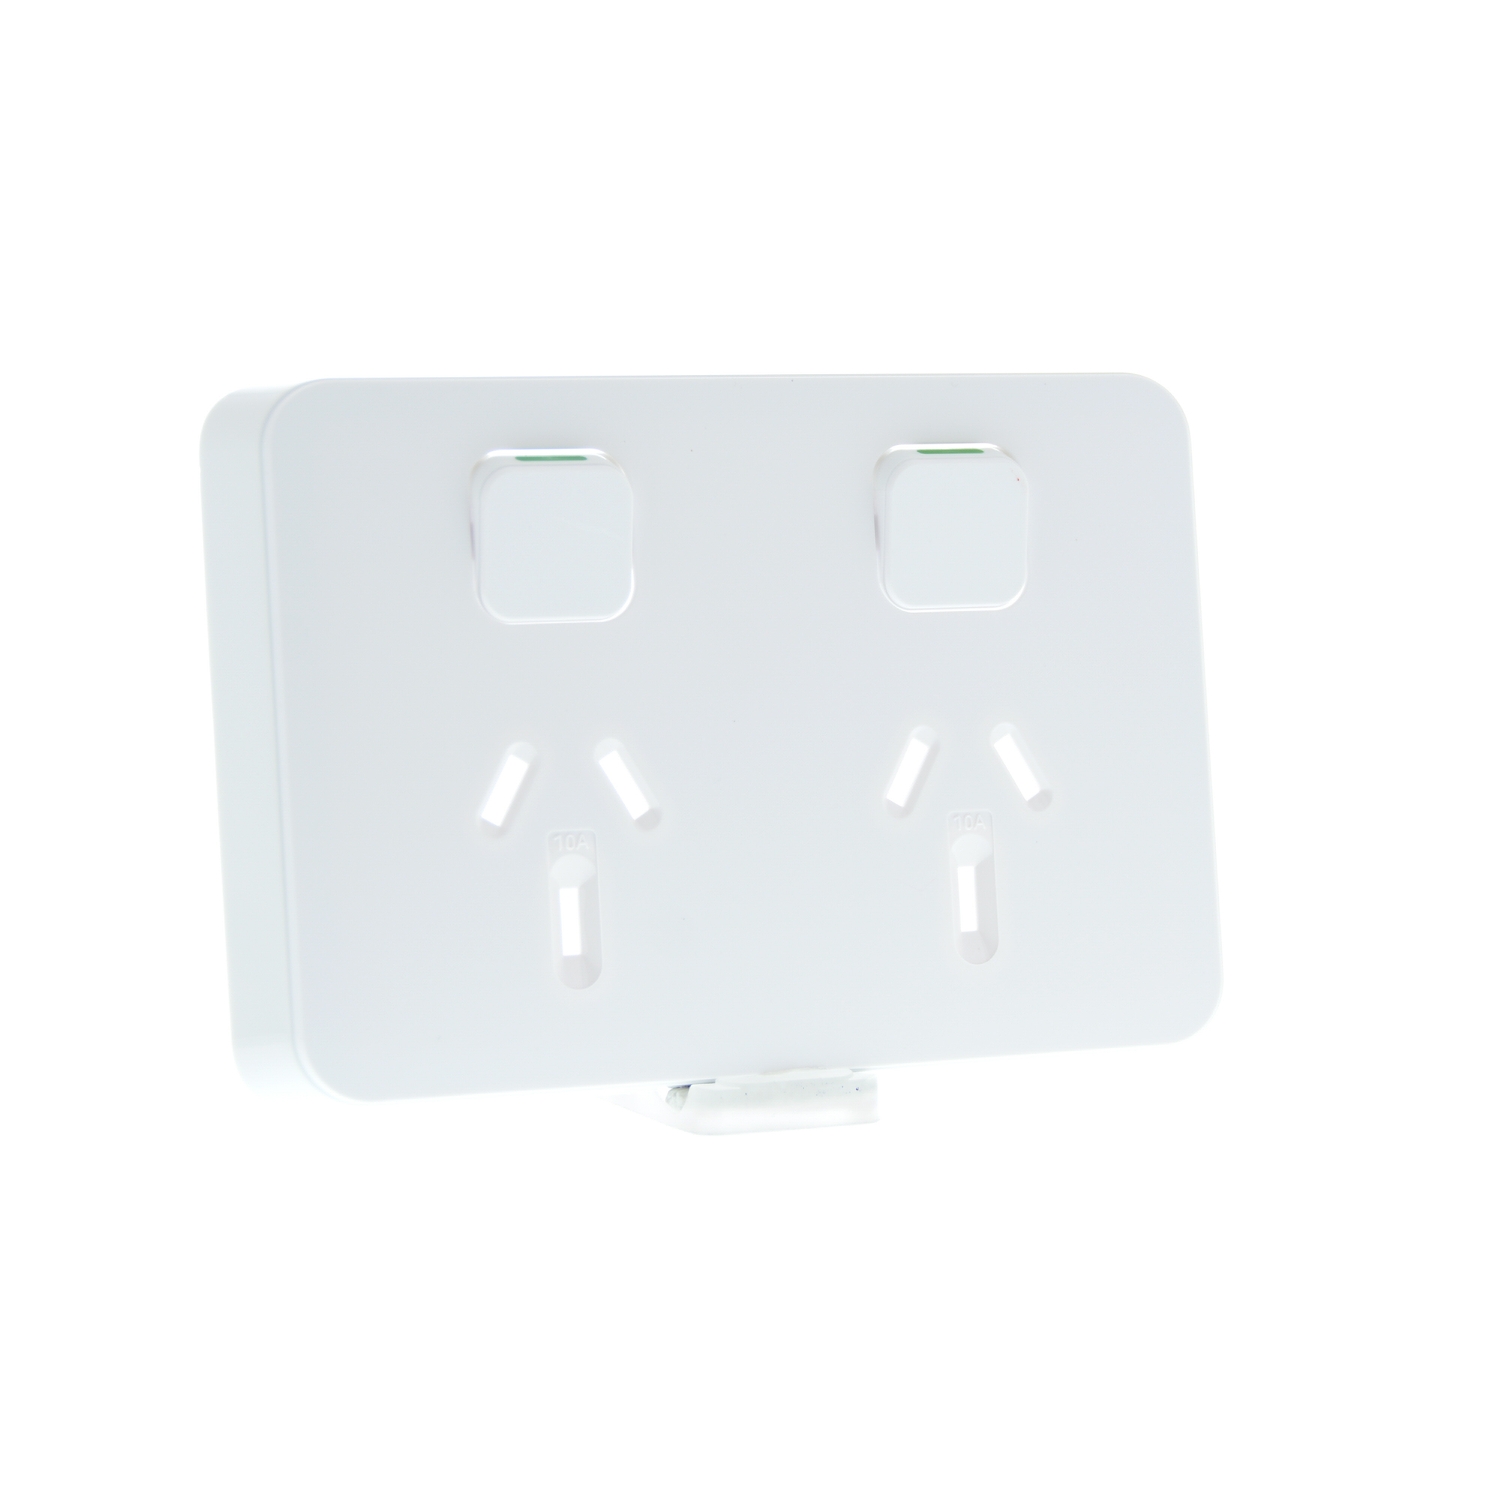 PDL Iconic - Cover Plate Double Switched Socket 10A Horizontal 250V - Solid White